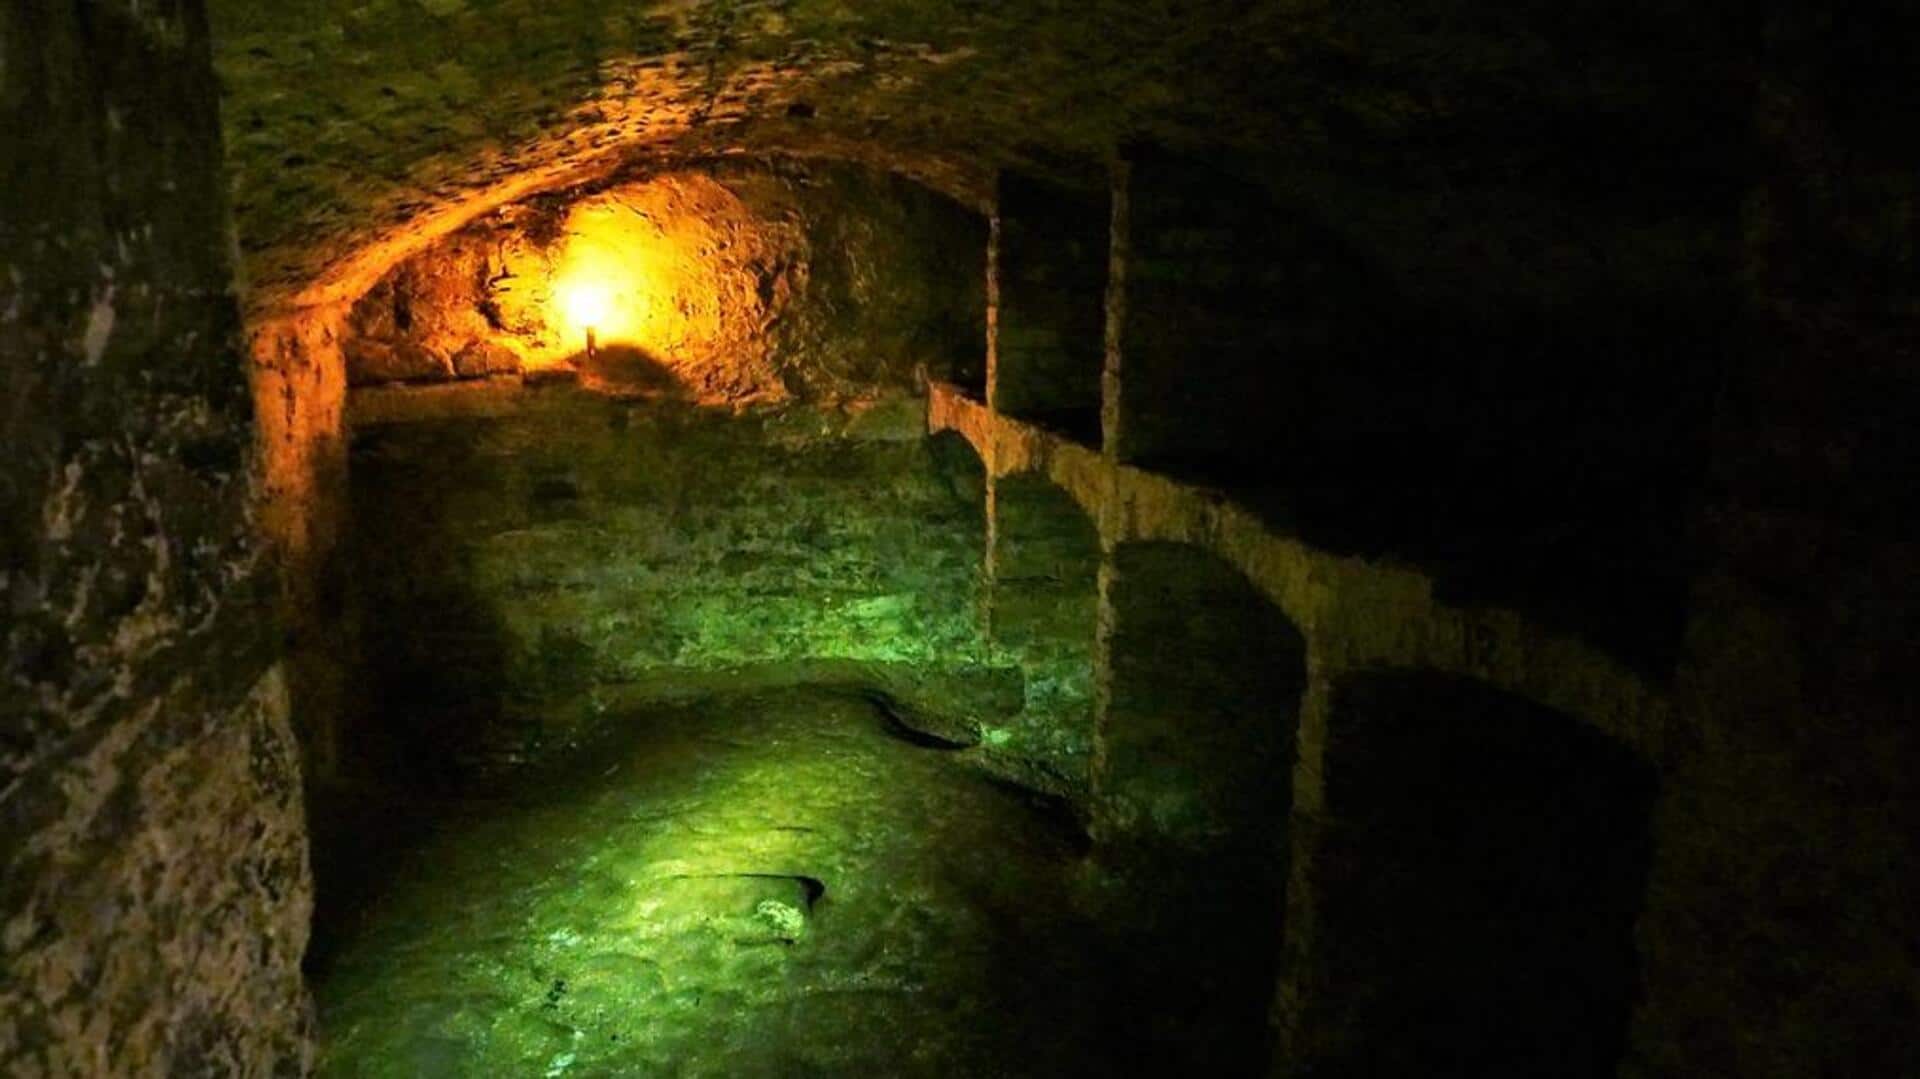 Discover Edinburgh's hidden depths with these awesome recommendations